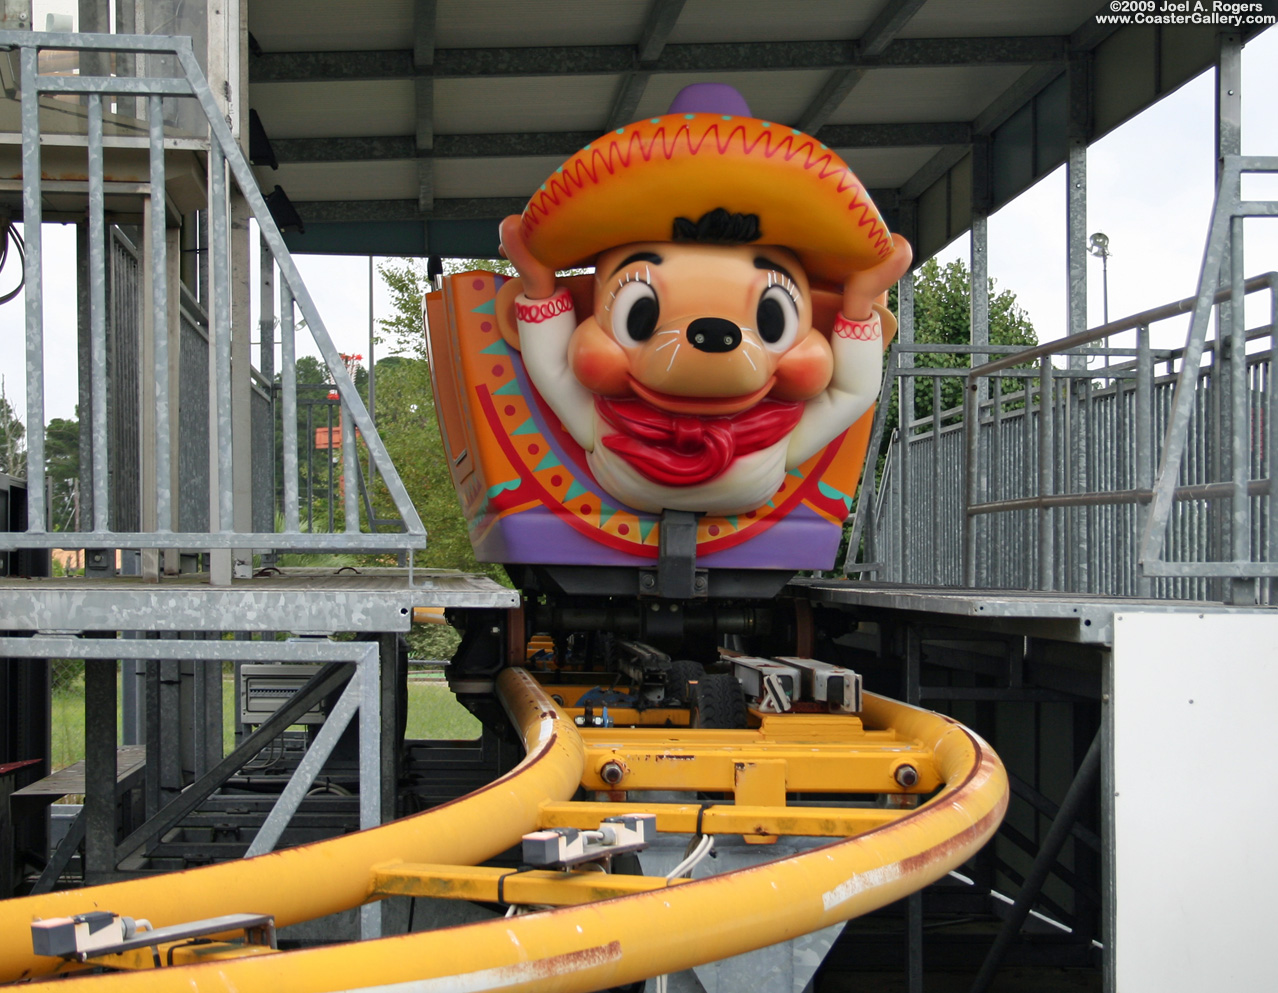 Mouse-style coaster car at South of the Border